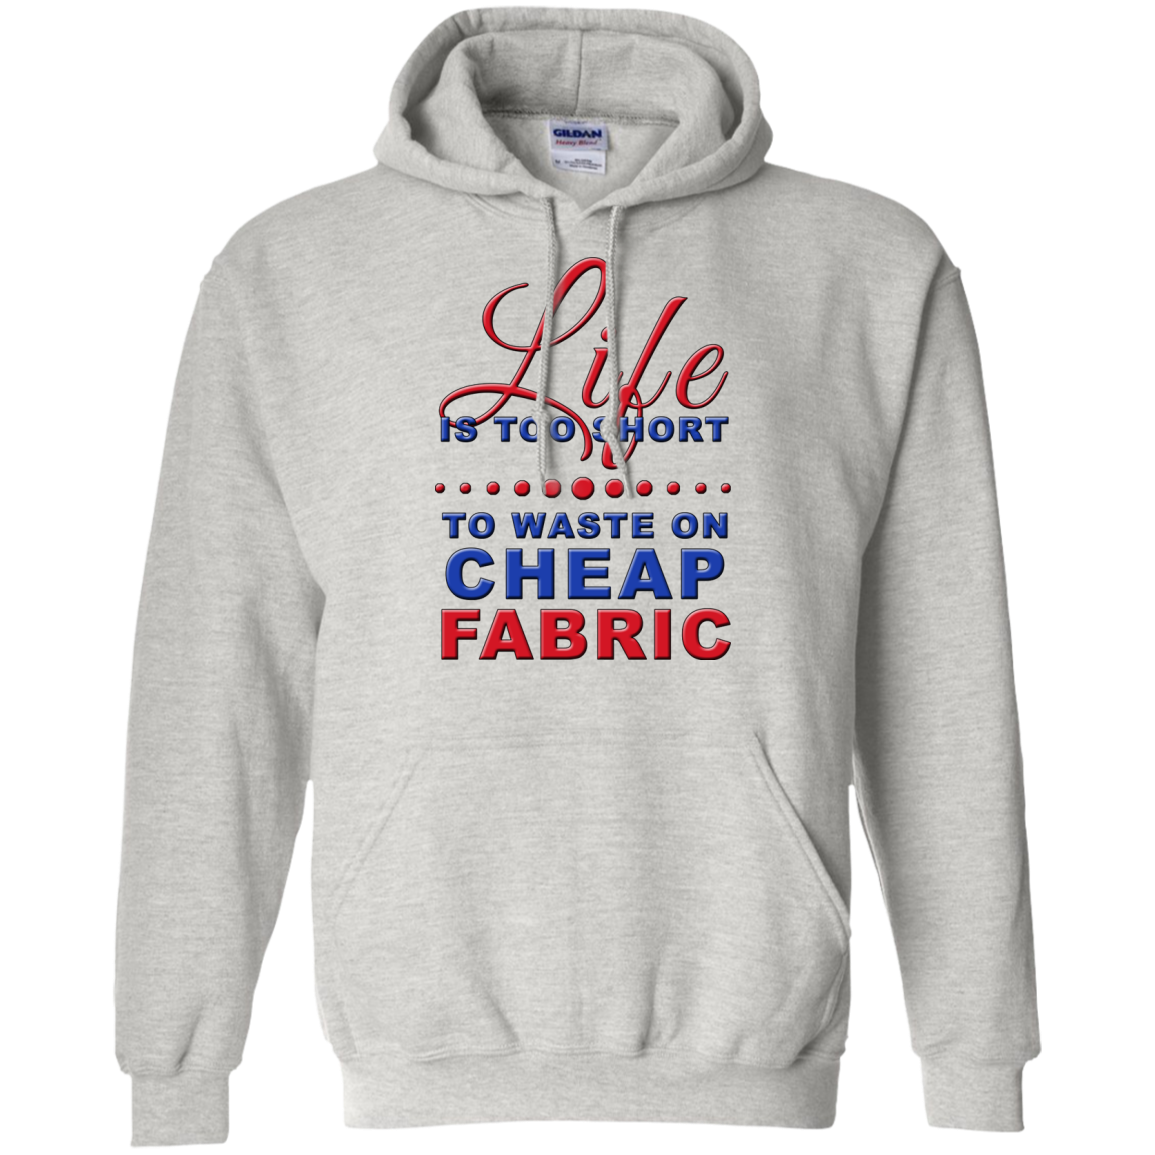 Life is Too Short to Use Cheap Fabric Pullover Hoodies - Crafter4Life - 3